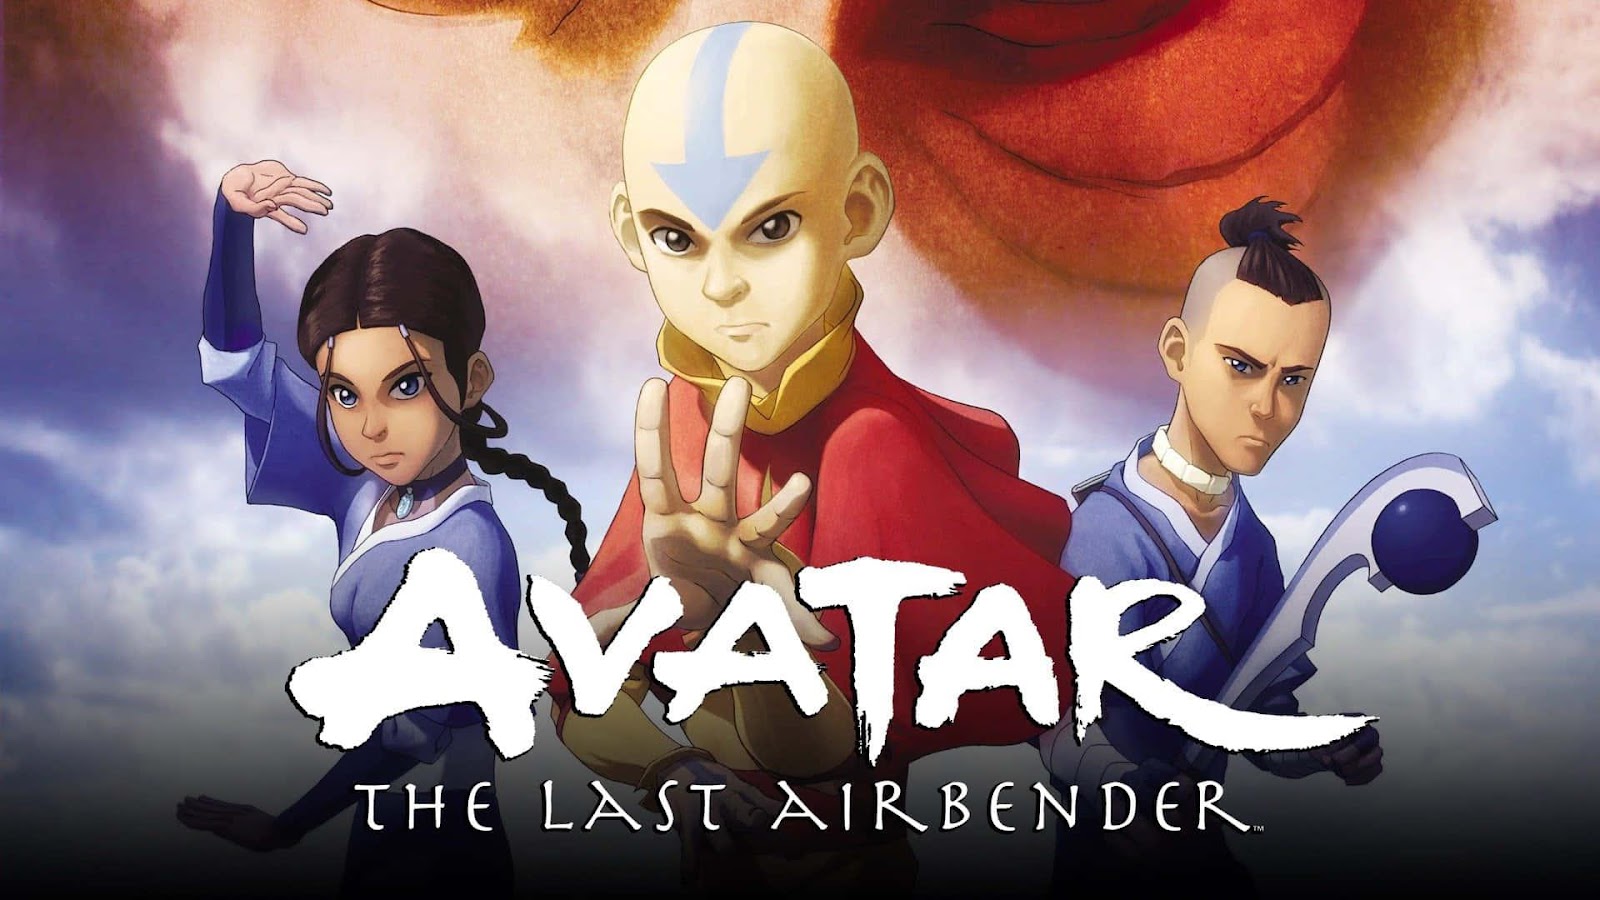 100+] Avatar The Last Airbender Pictures | Wallpapers.com